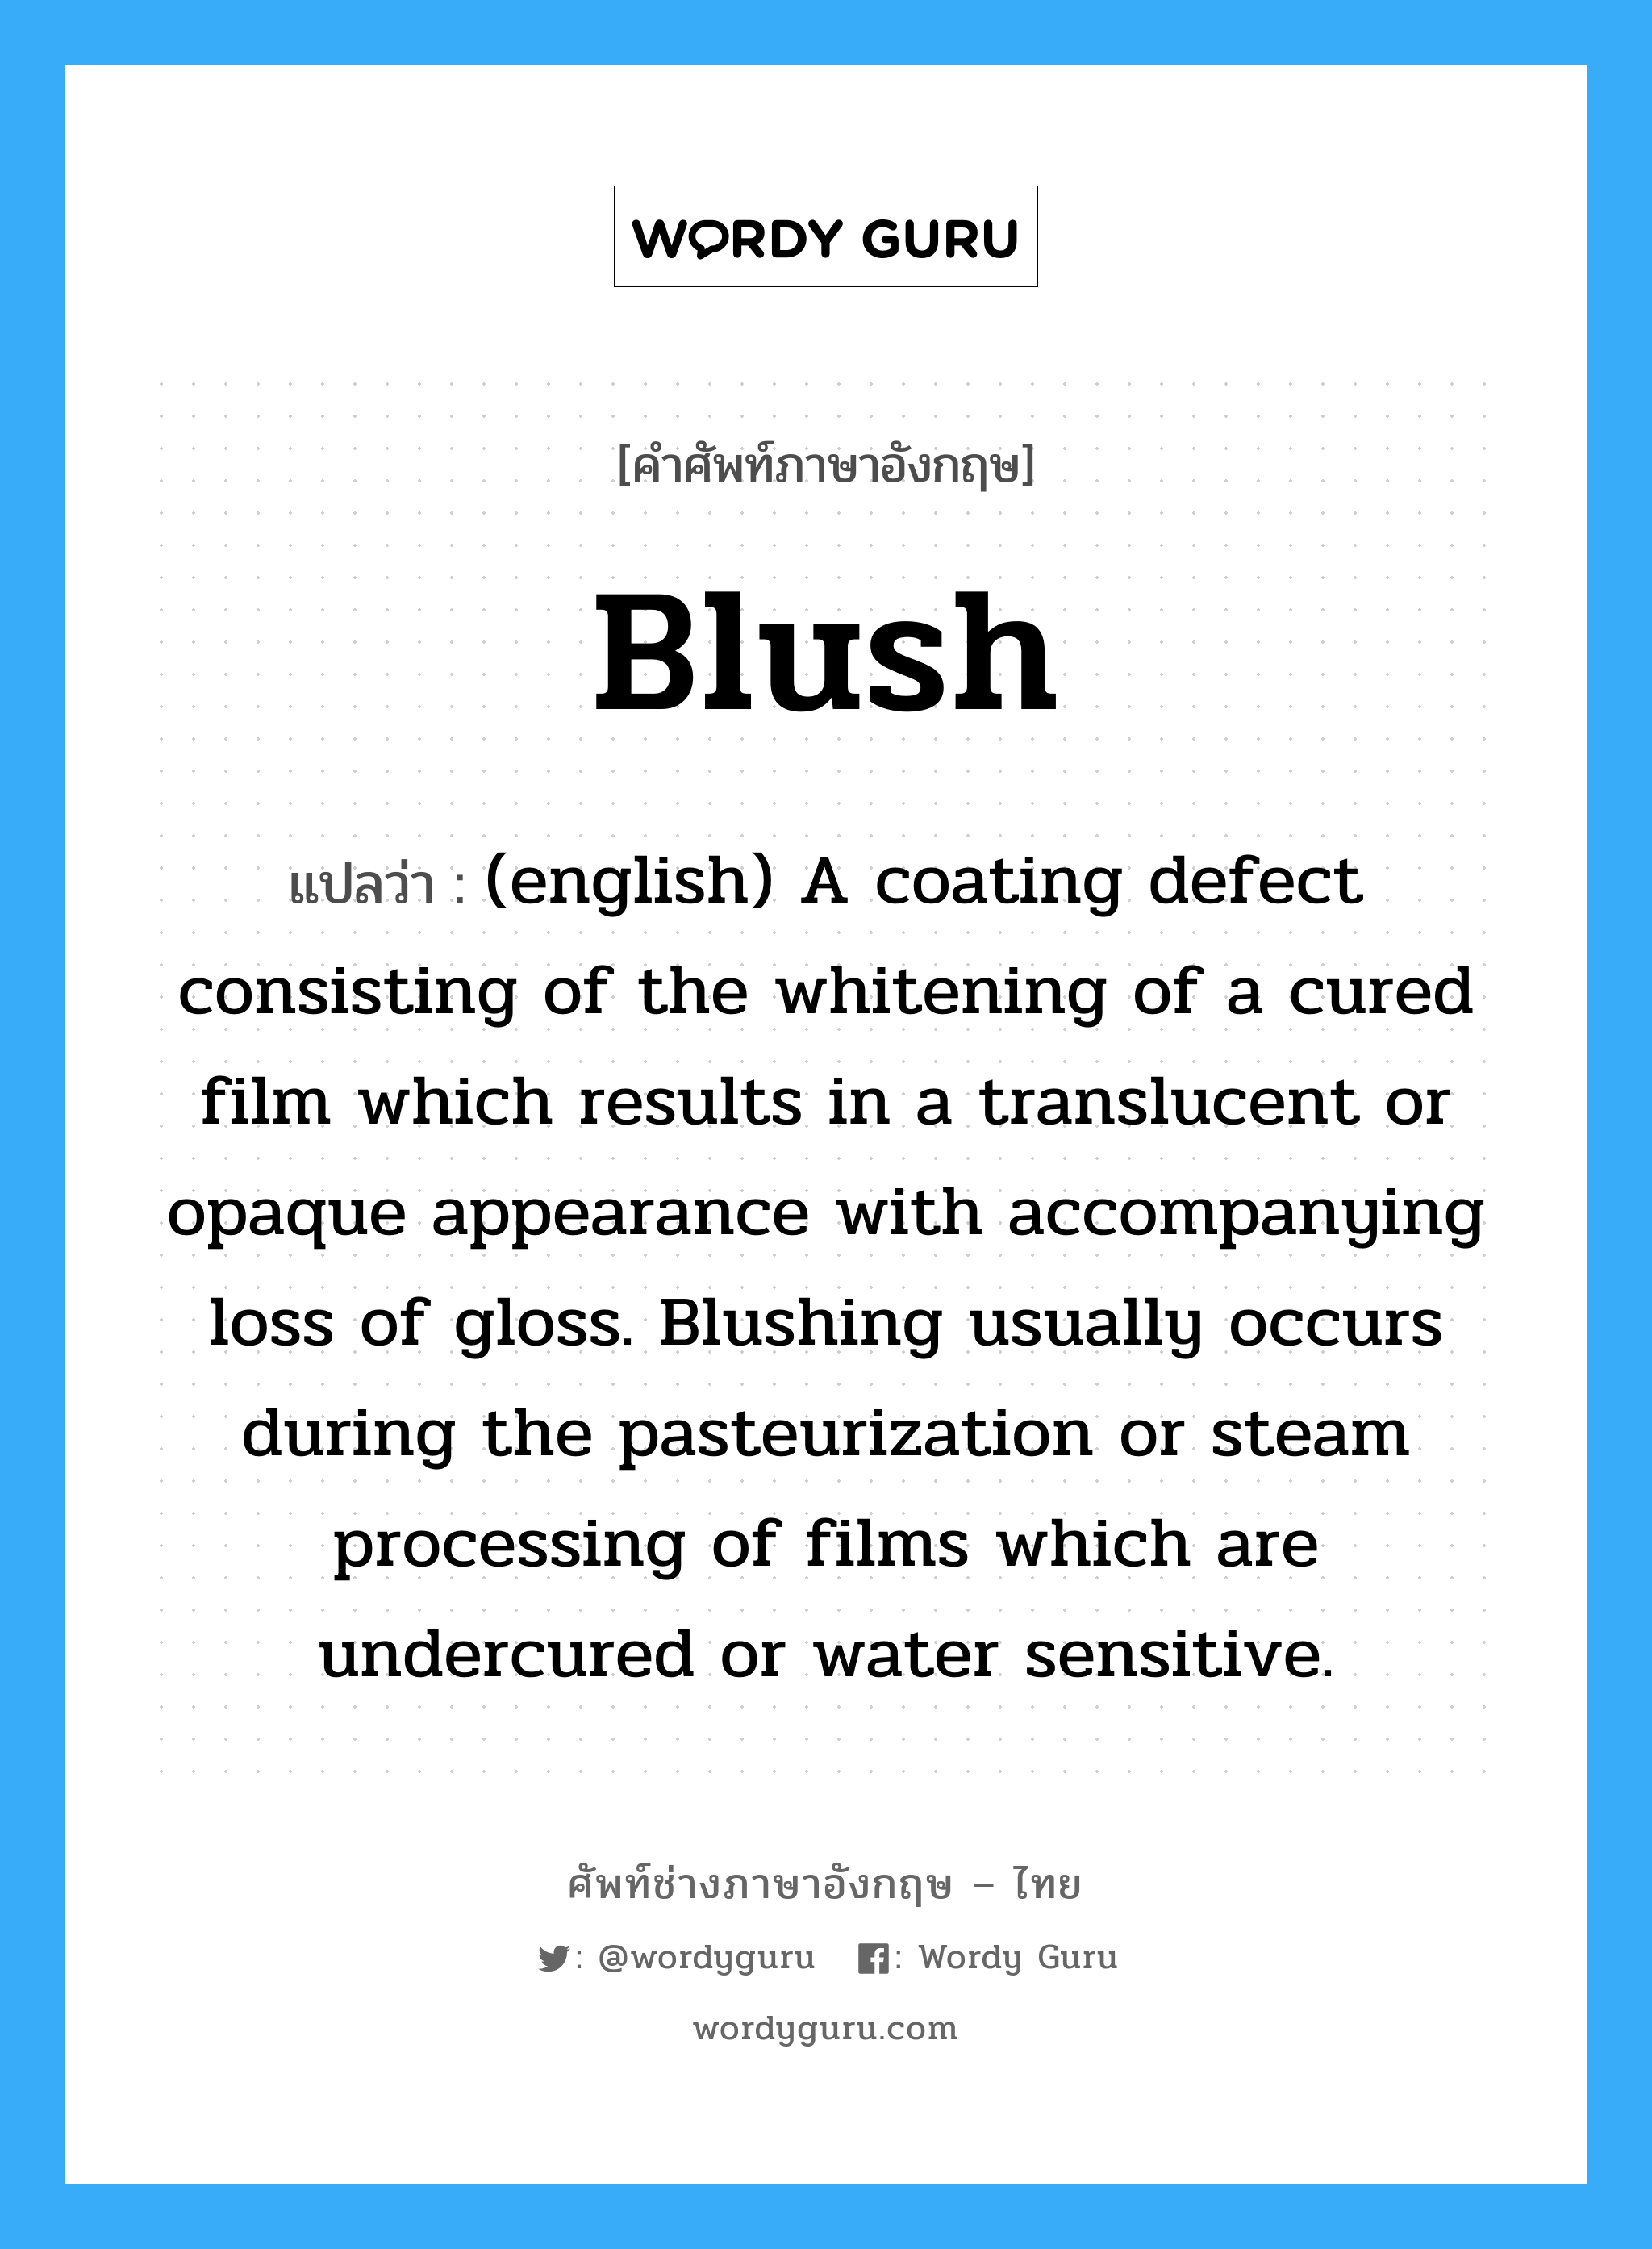 Blush แปลว่า?, คำศัพท์ช่างภาษาอังกฤษ - ไทย Blush คำศัพท์ภาษาอังกฤษ Blush แปลว่า (english) A coating defect consisting of the whitening of a cured film which results in a translucent or opaque appearance with accompanying loss of gloss. Blushing usually occurs during the pasteurization or steam processing of films which are undercured or water sensitive.